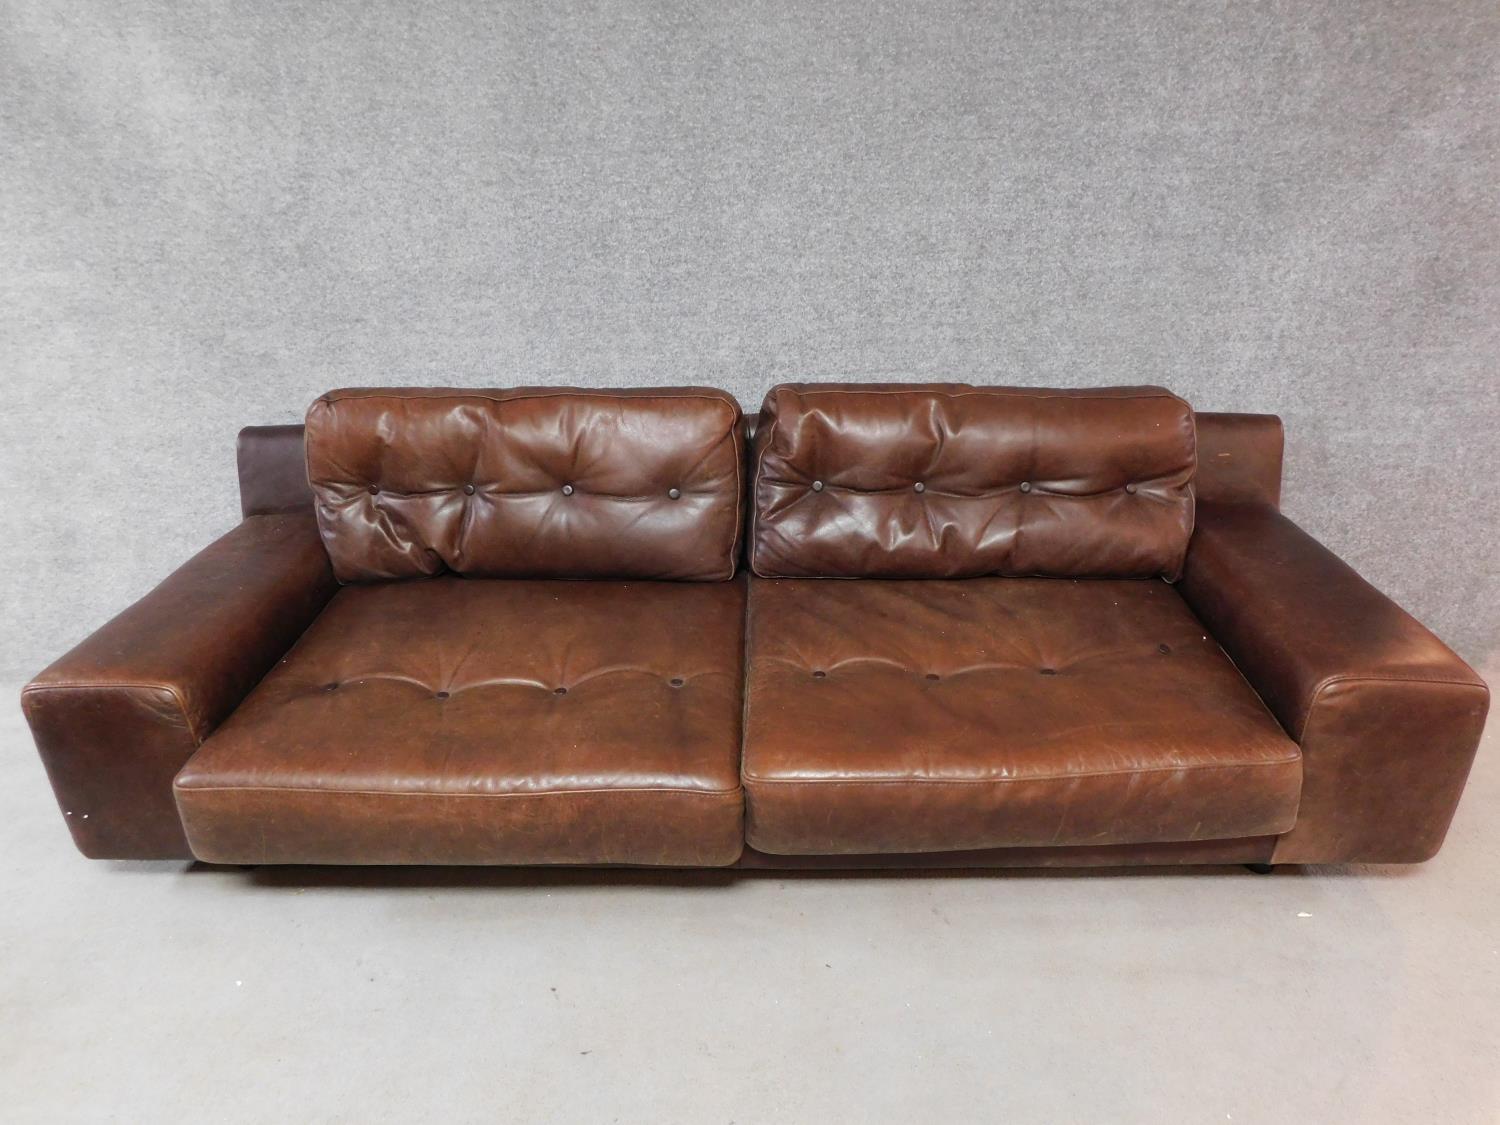 A vintage style brown leather button back two seater sofa retailed by Habitat. H.65 W.236 D.90cm